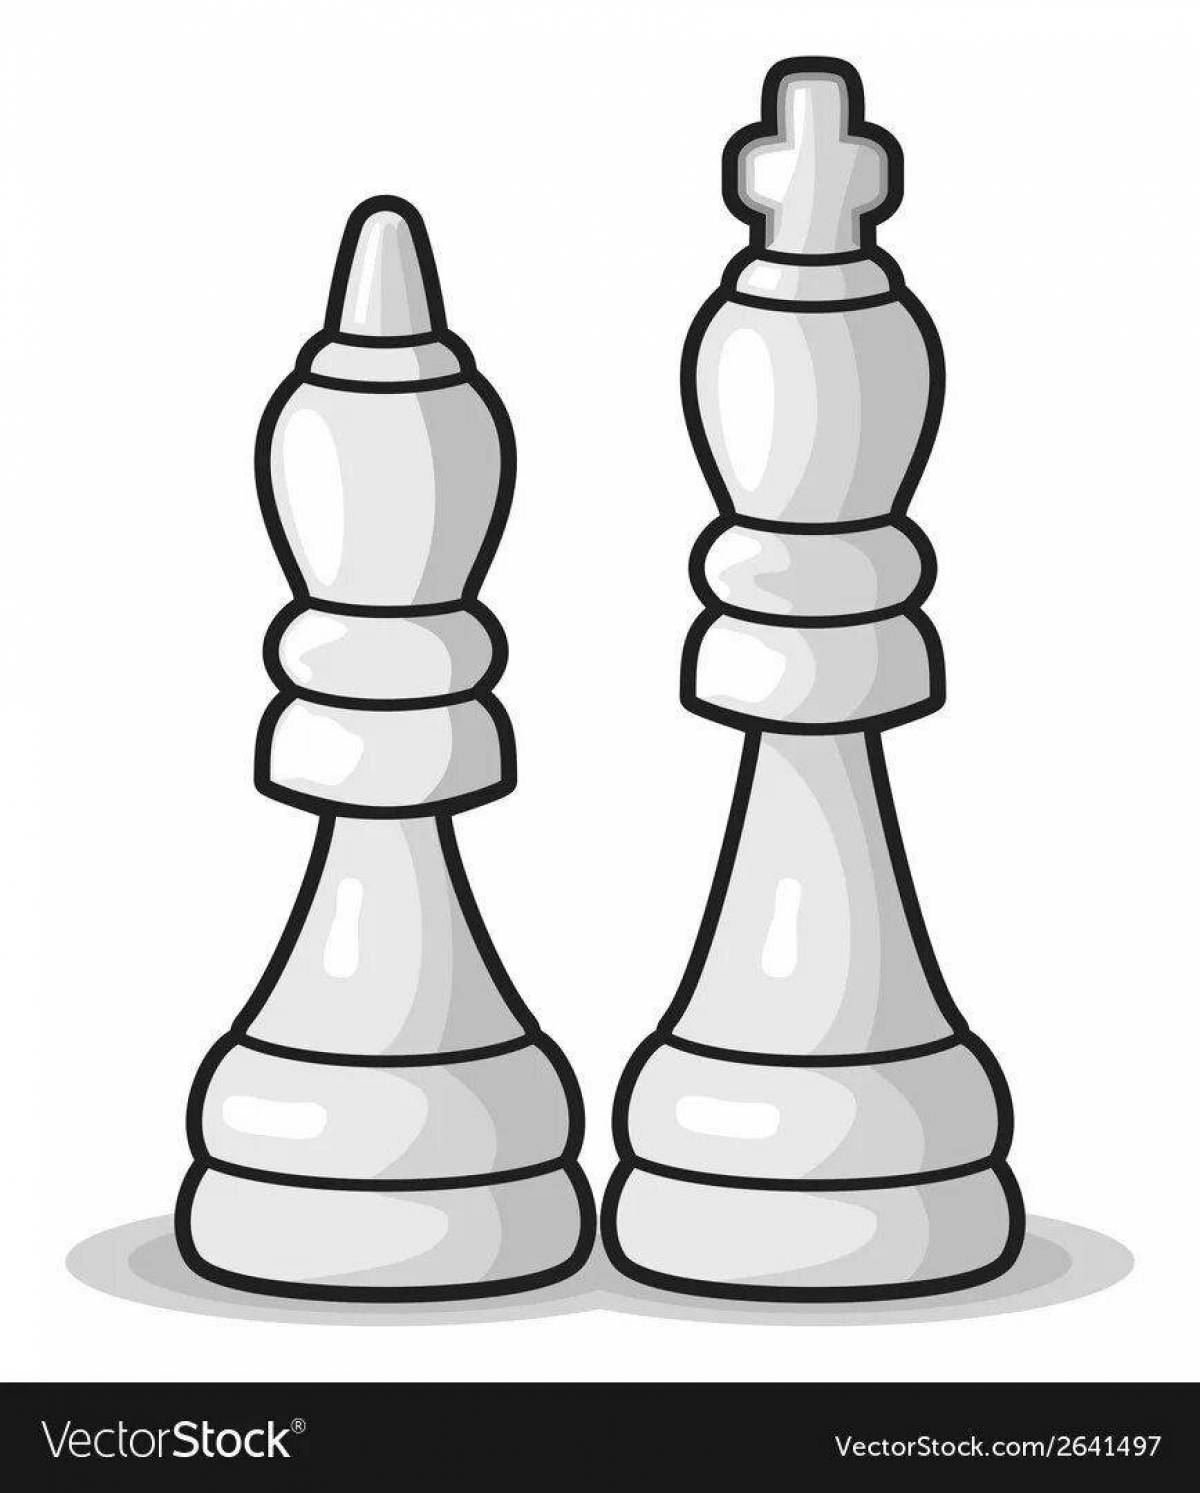 Gorgeous chess king coloring page